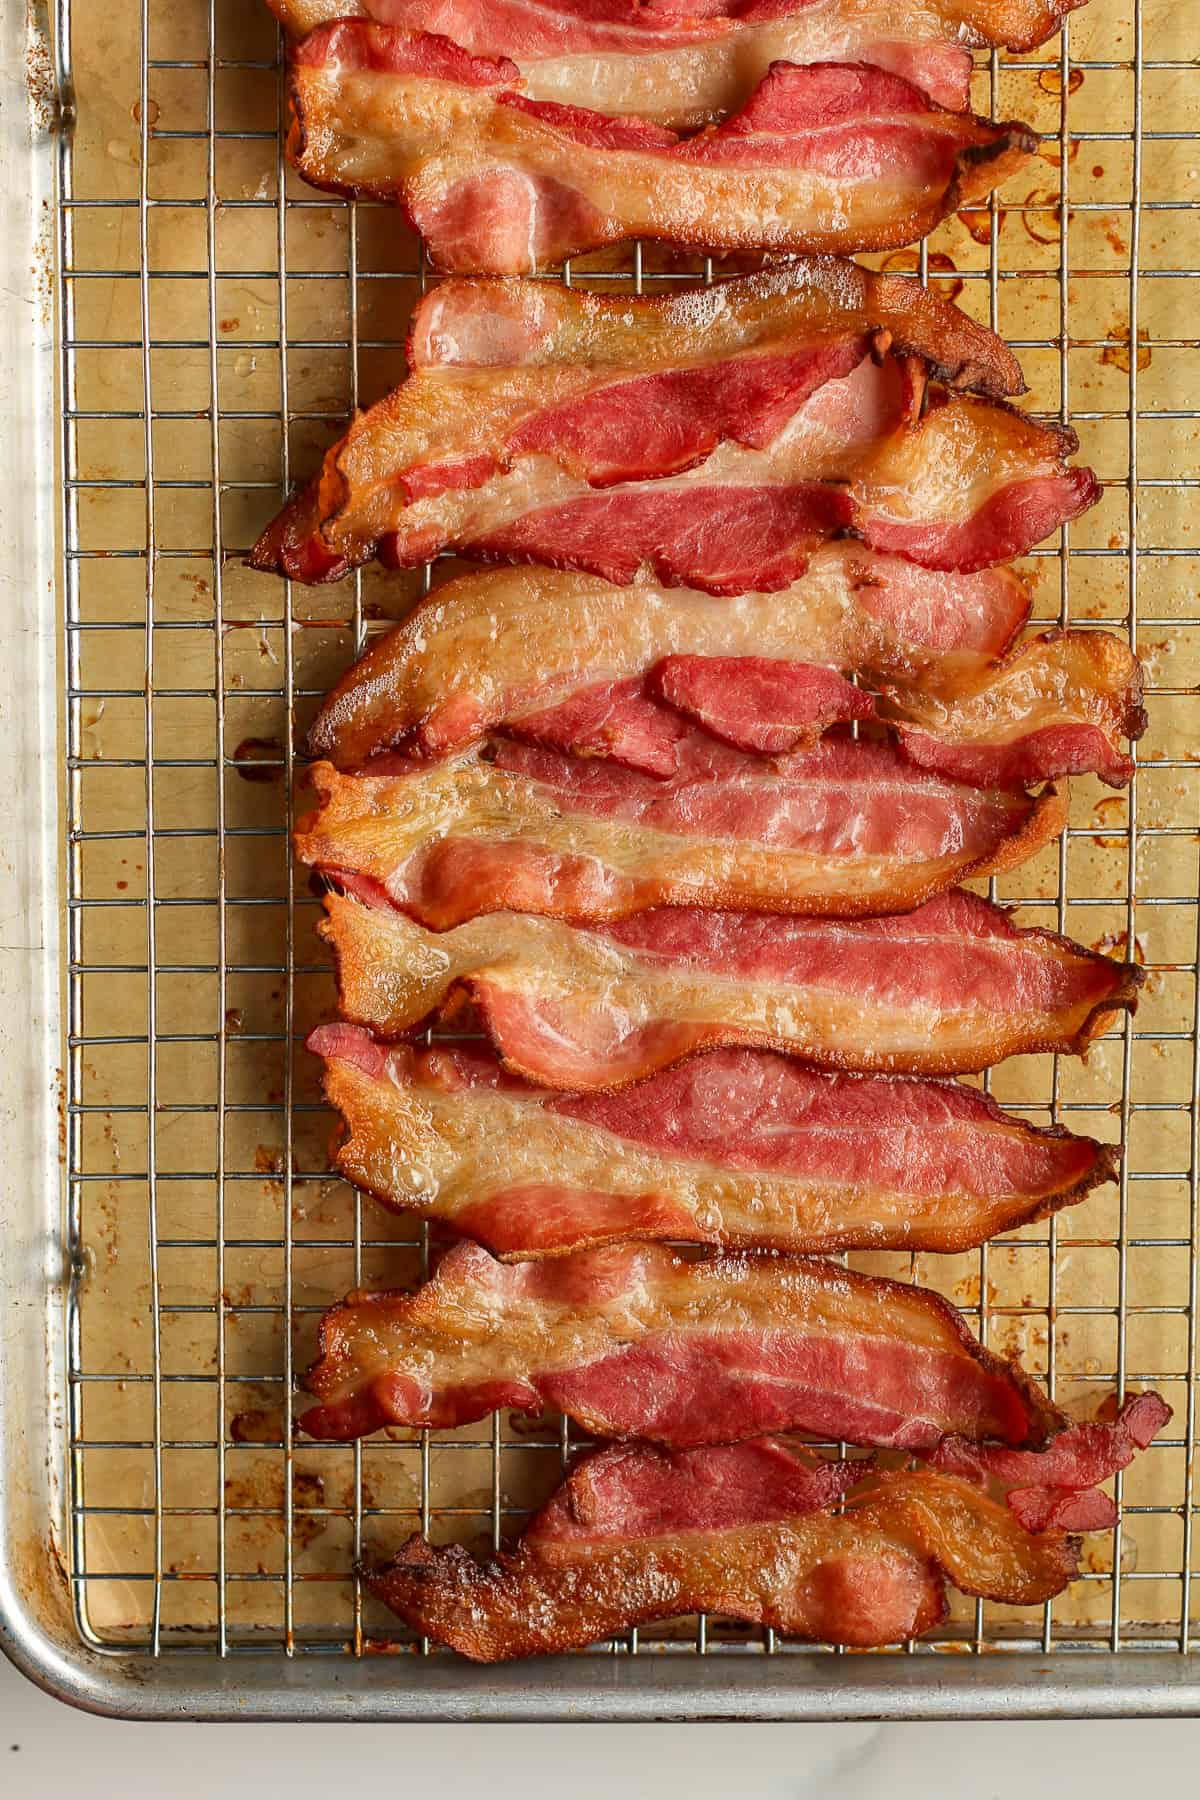 The cooked bacon.